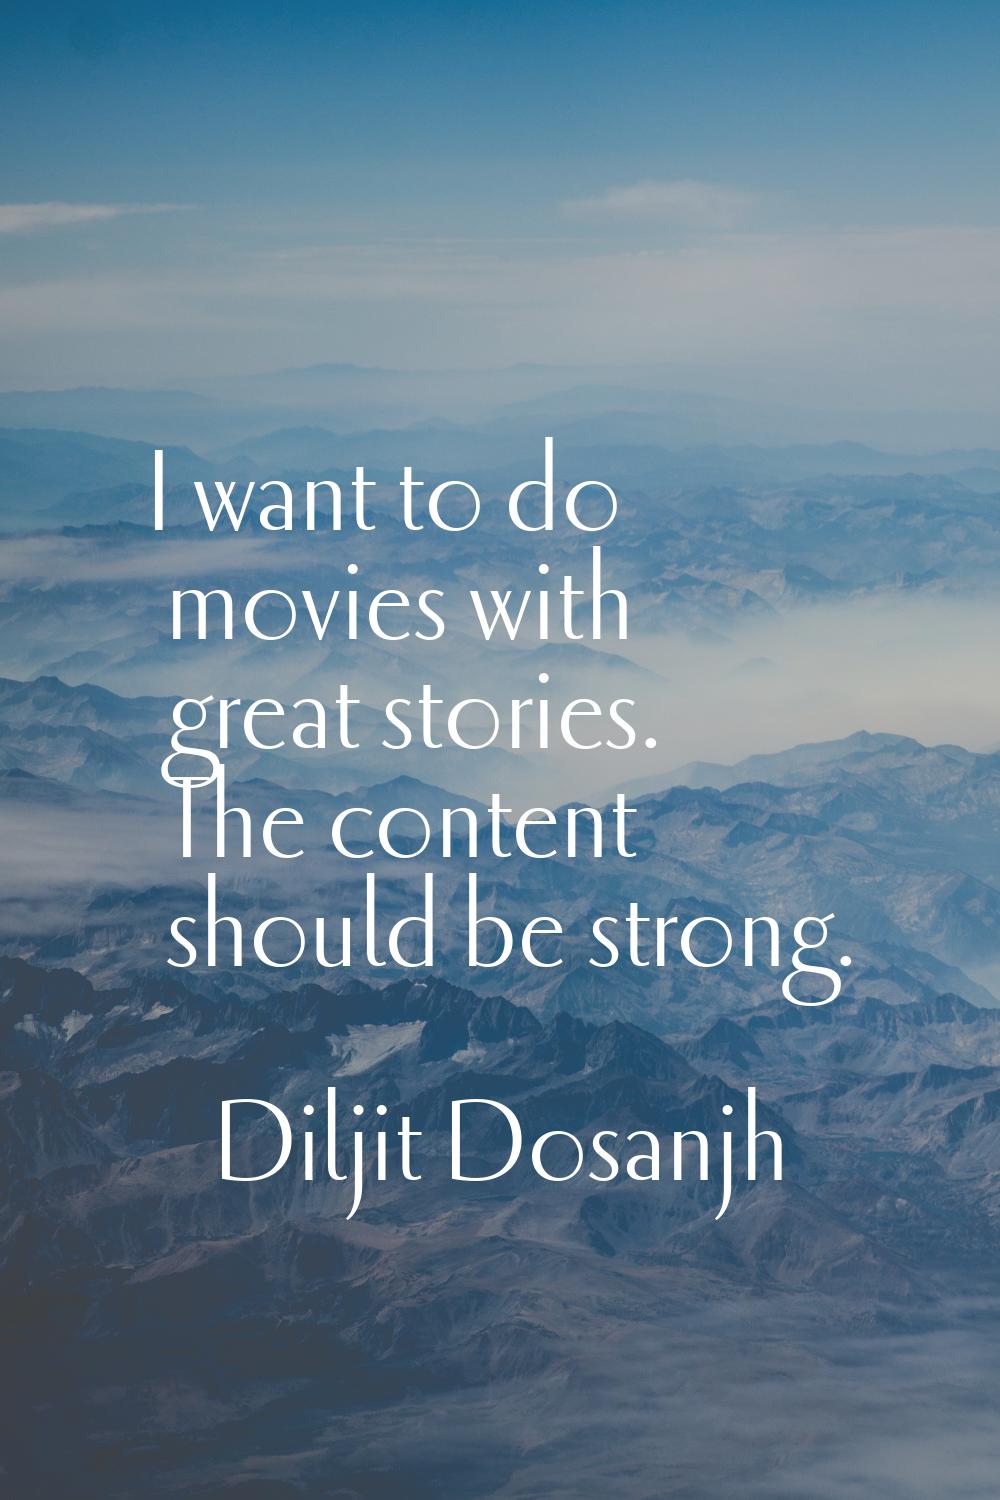 I want to do movies with great stories. The content should be strong.